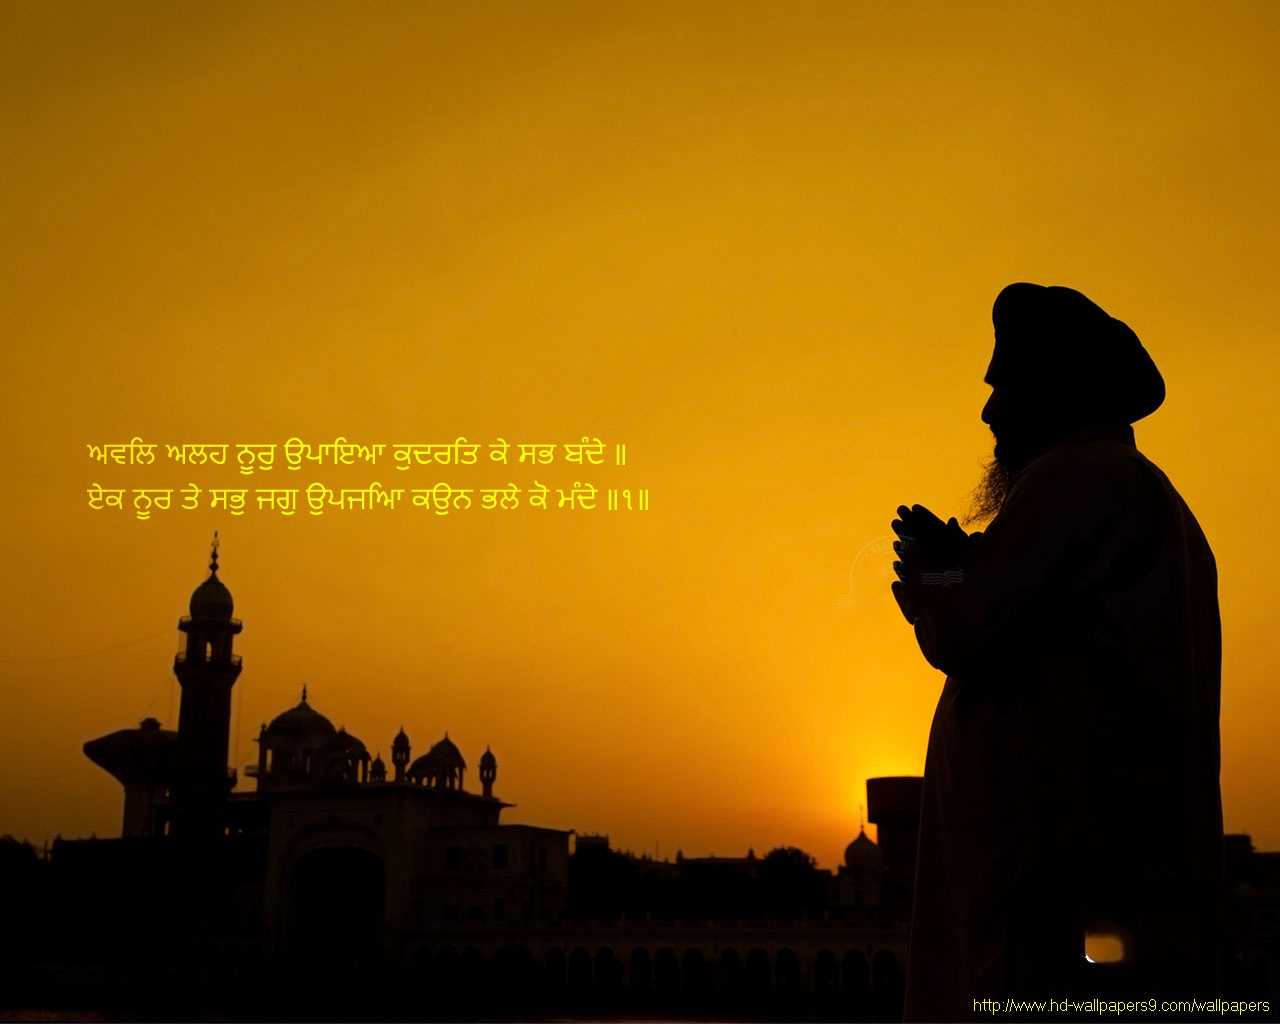 Sikh Wallpapers Hd Gods sikhism wallpapers